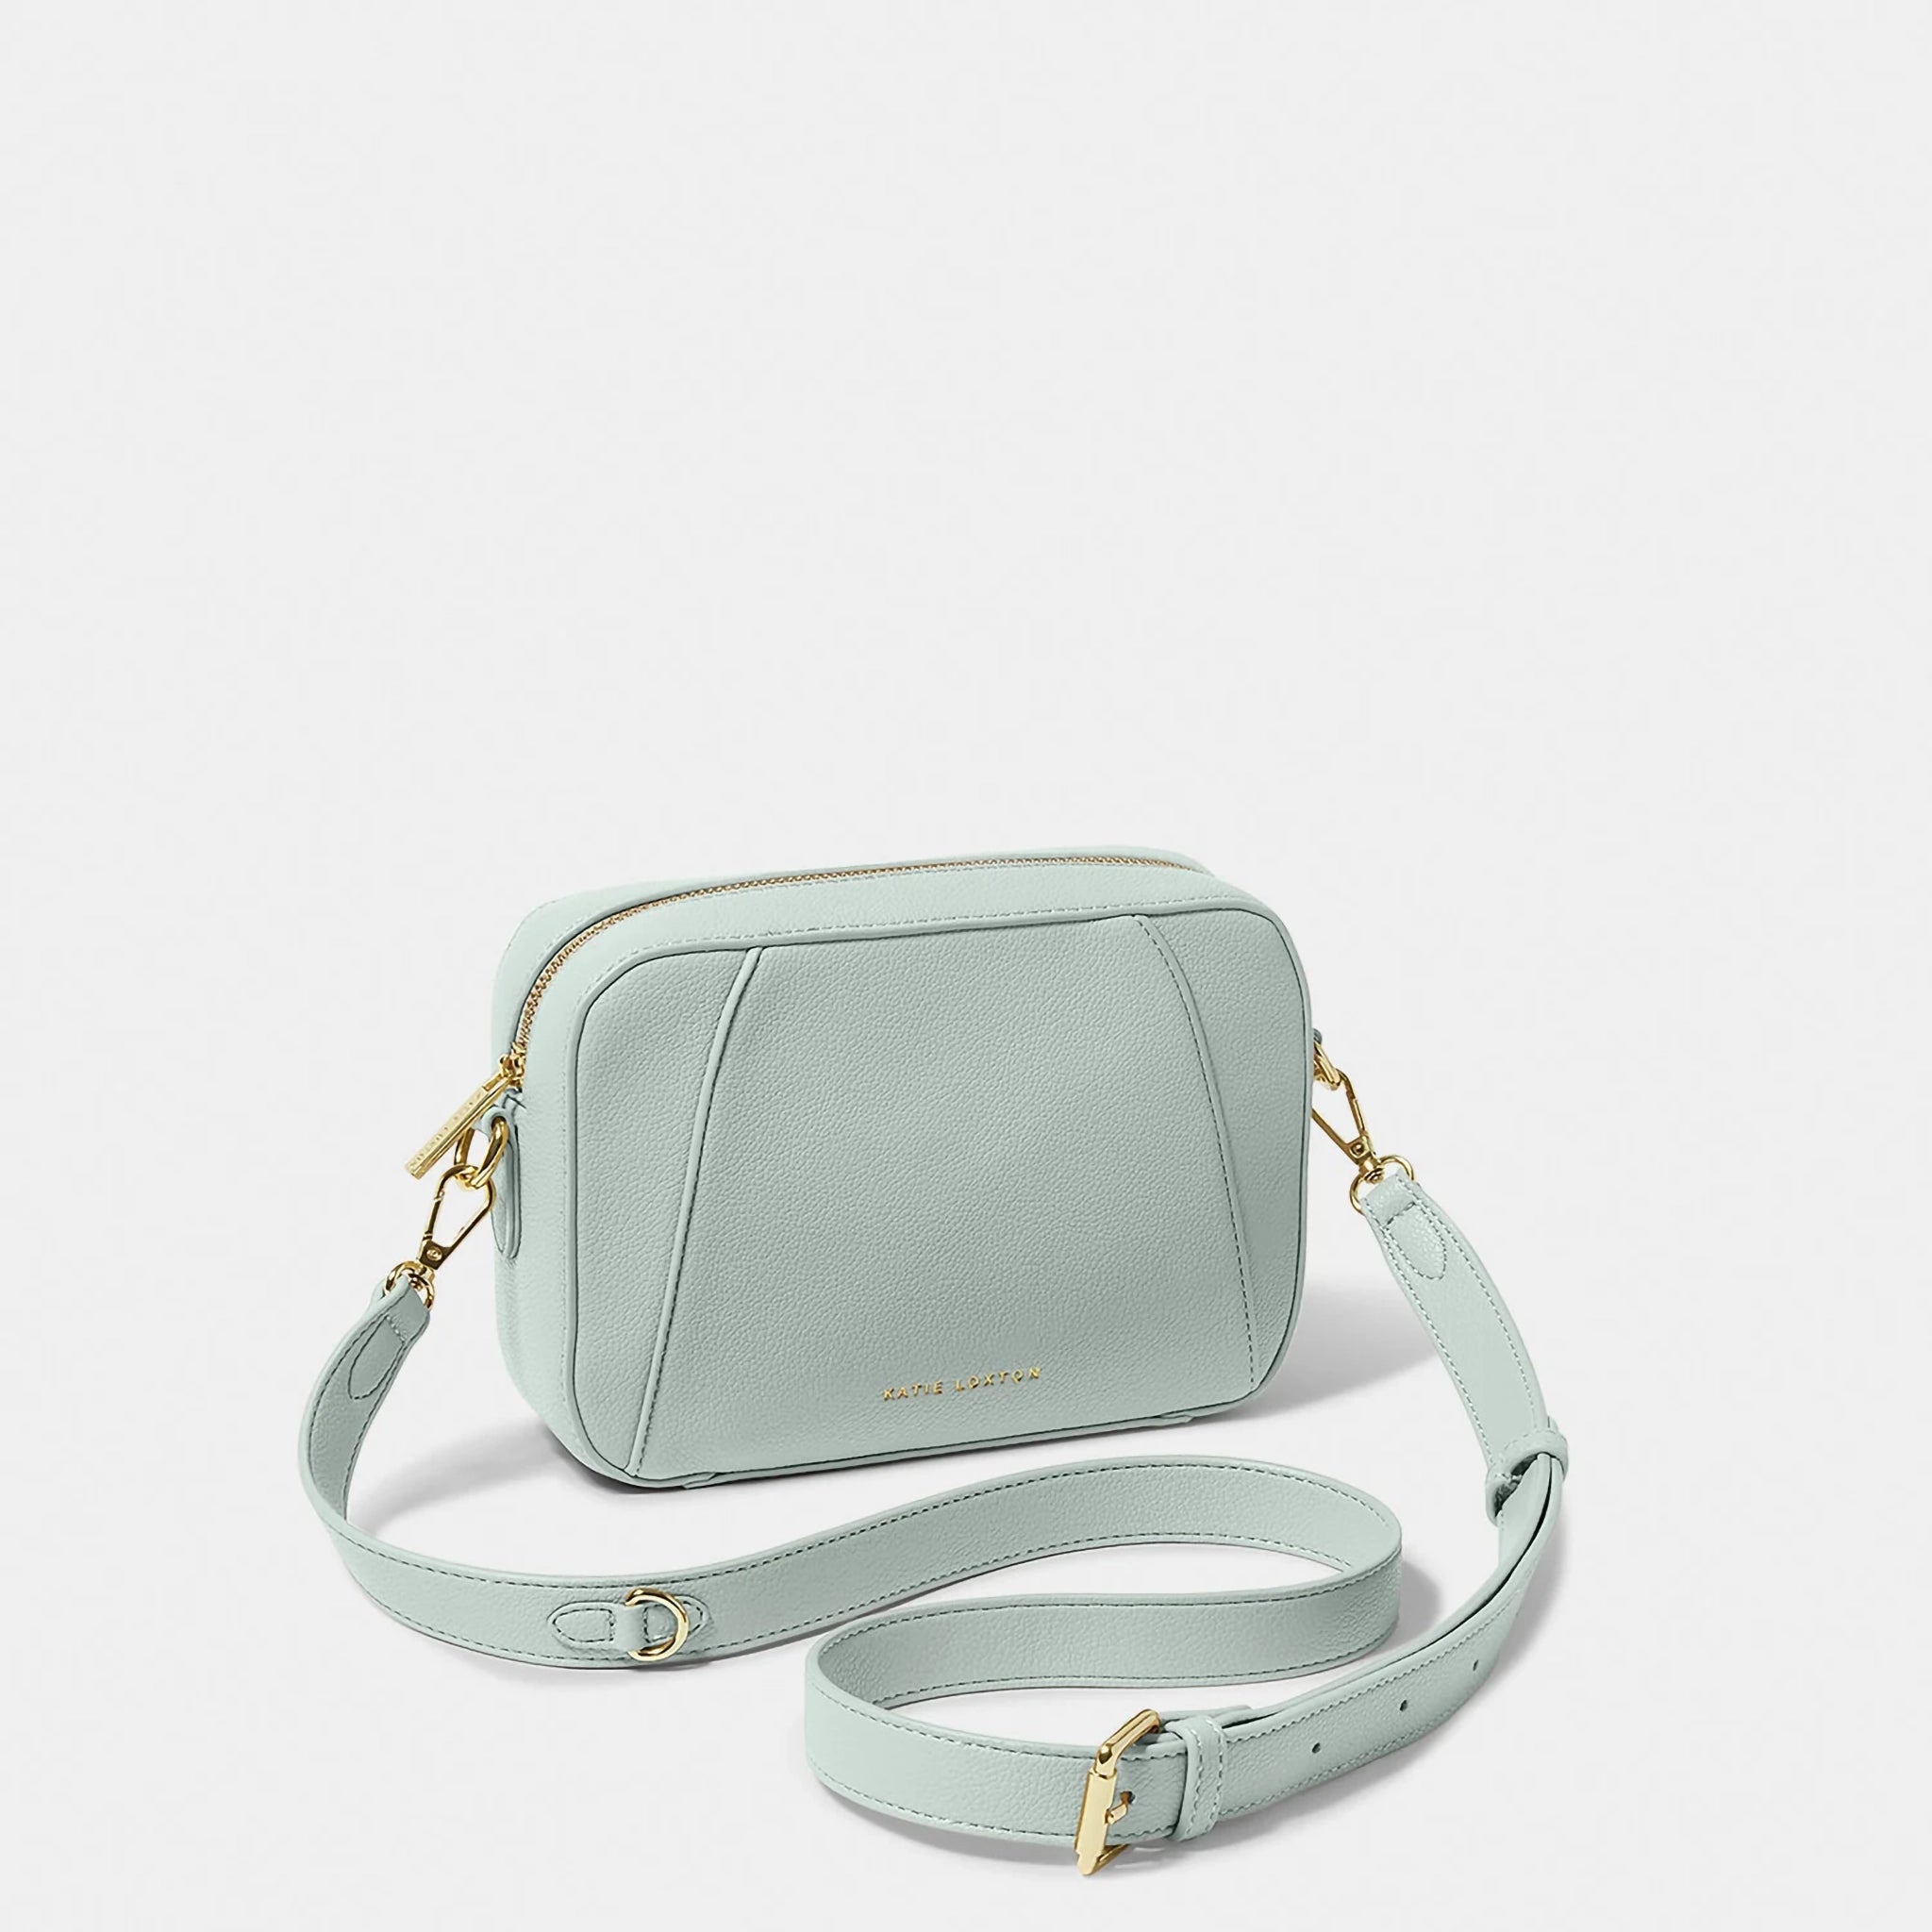 A light blue crossbody bag in a simple box shape with adjustable strap and gold hardware